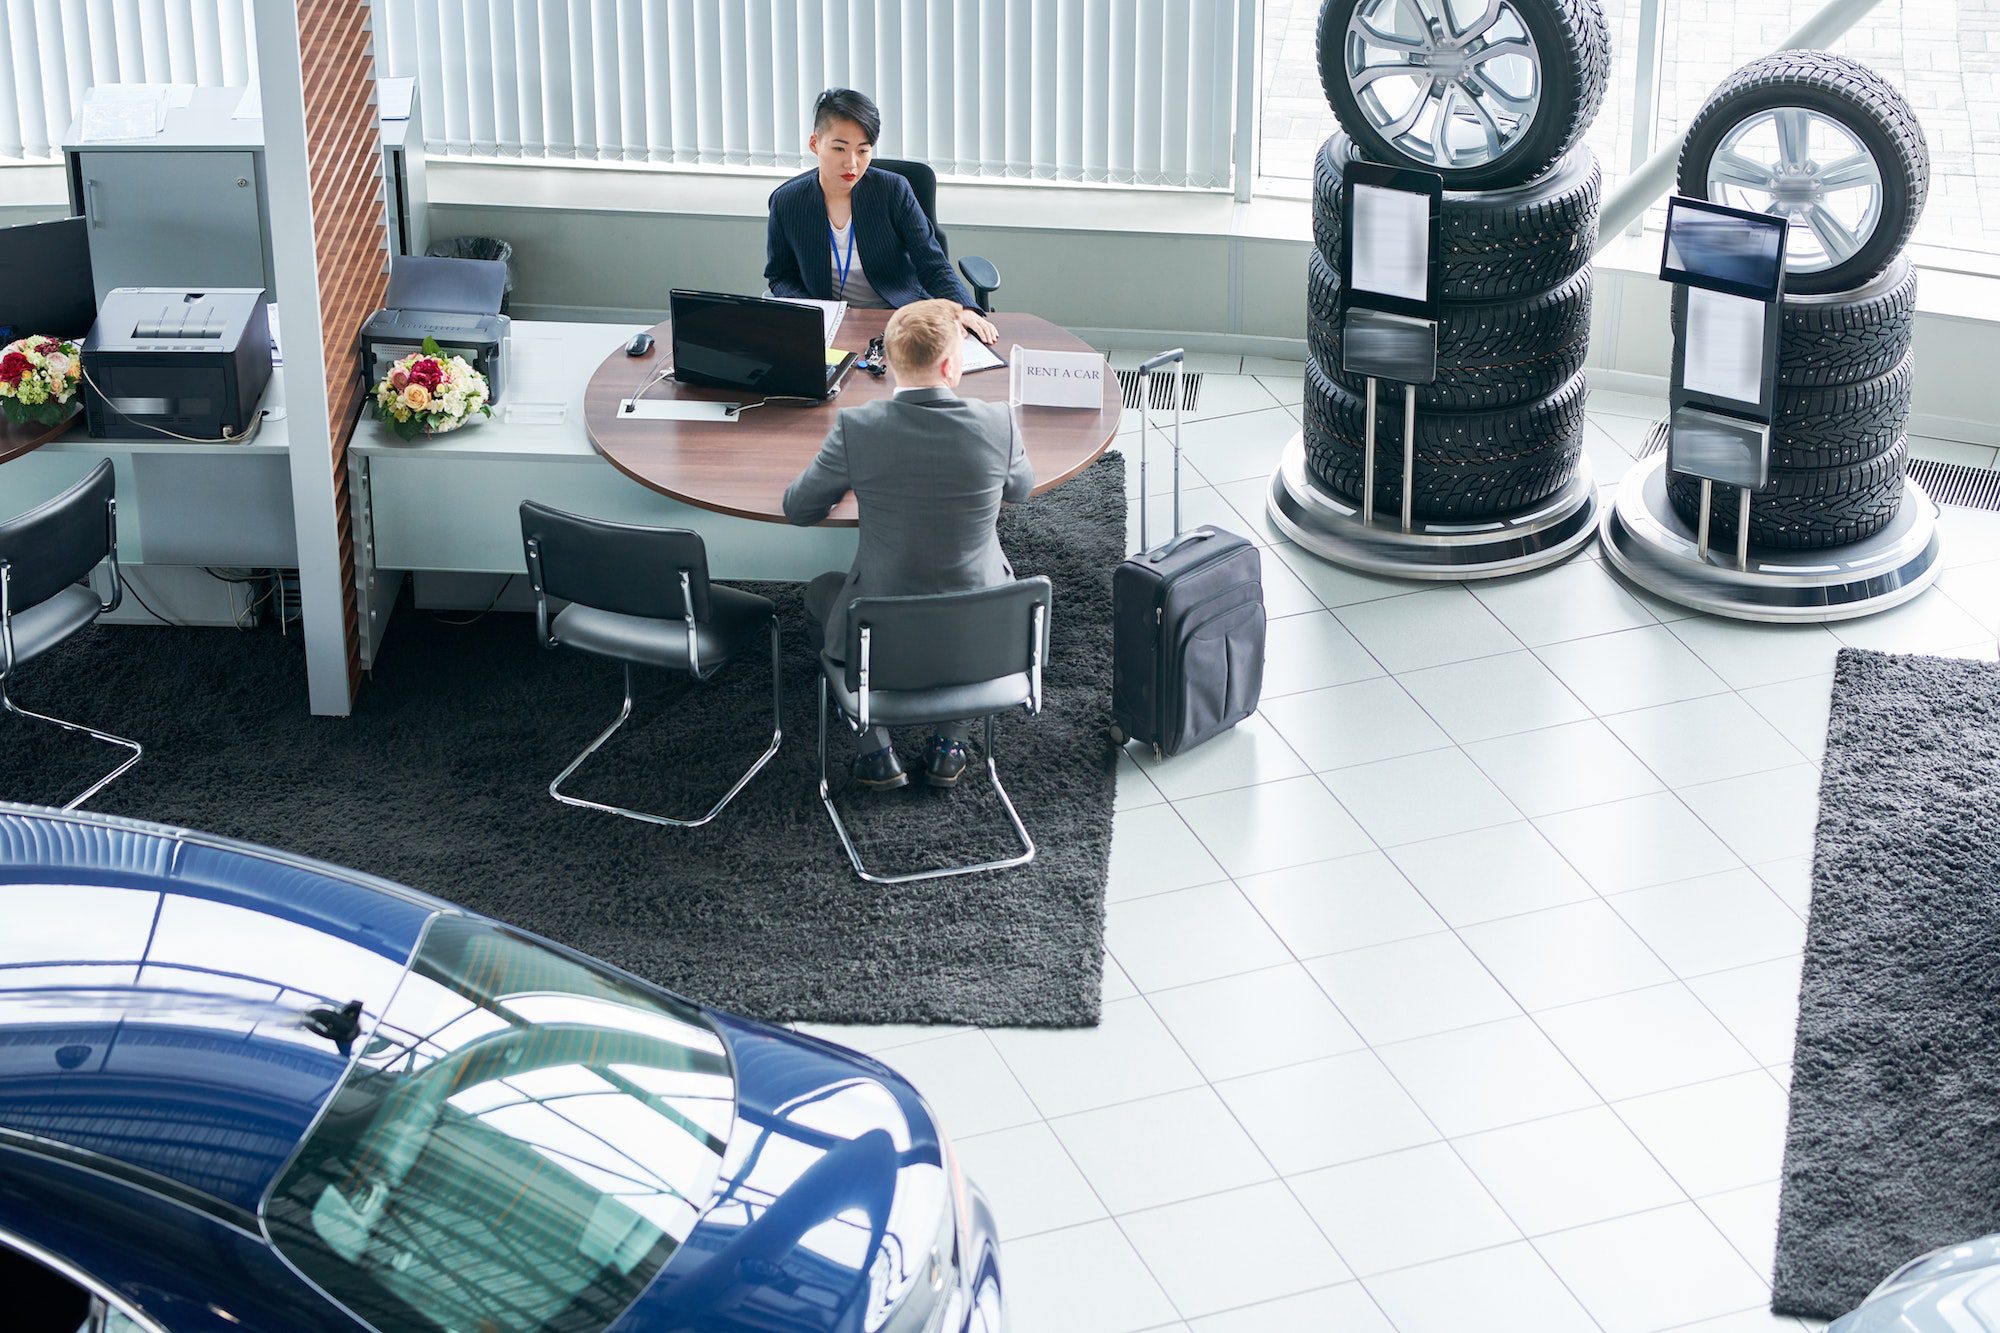 How can I use data and analytics to improve my dealership's digital marketing strategy?